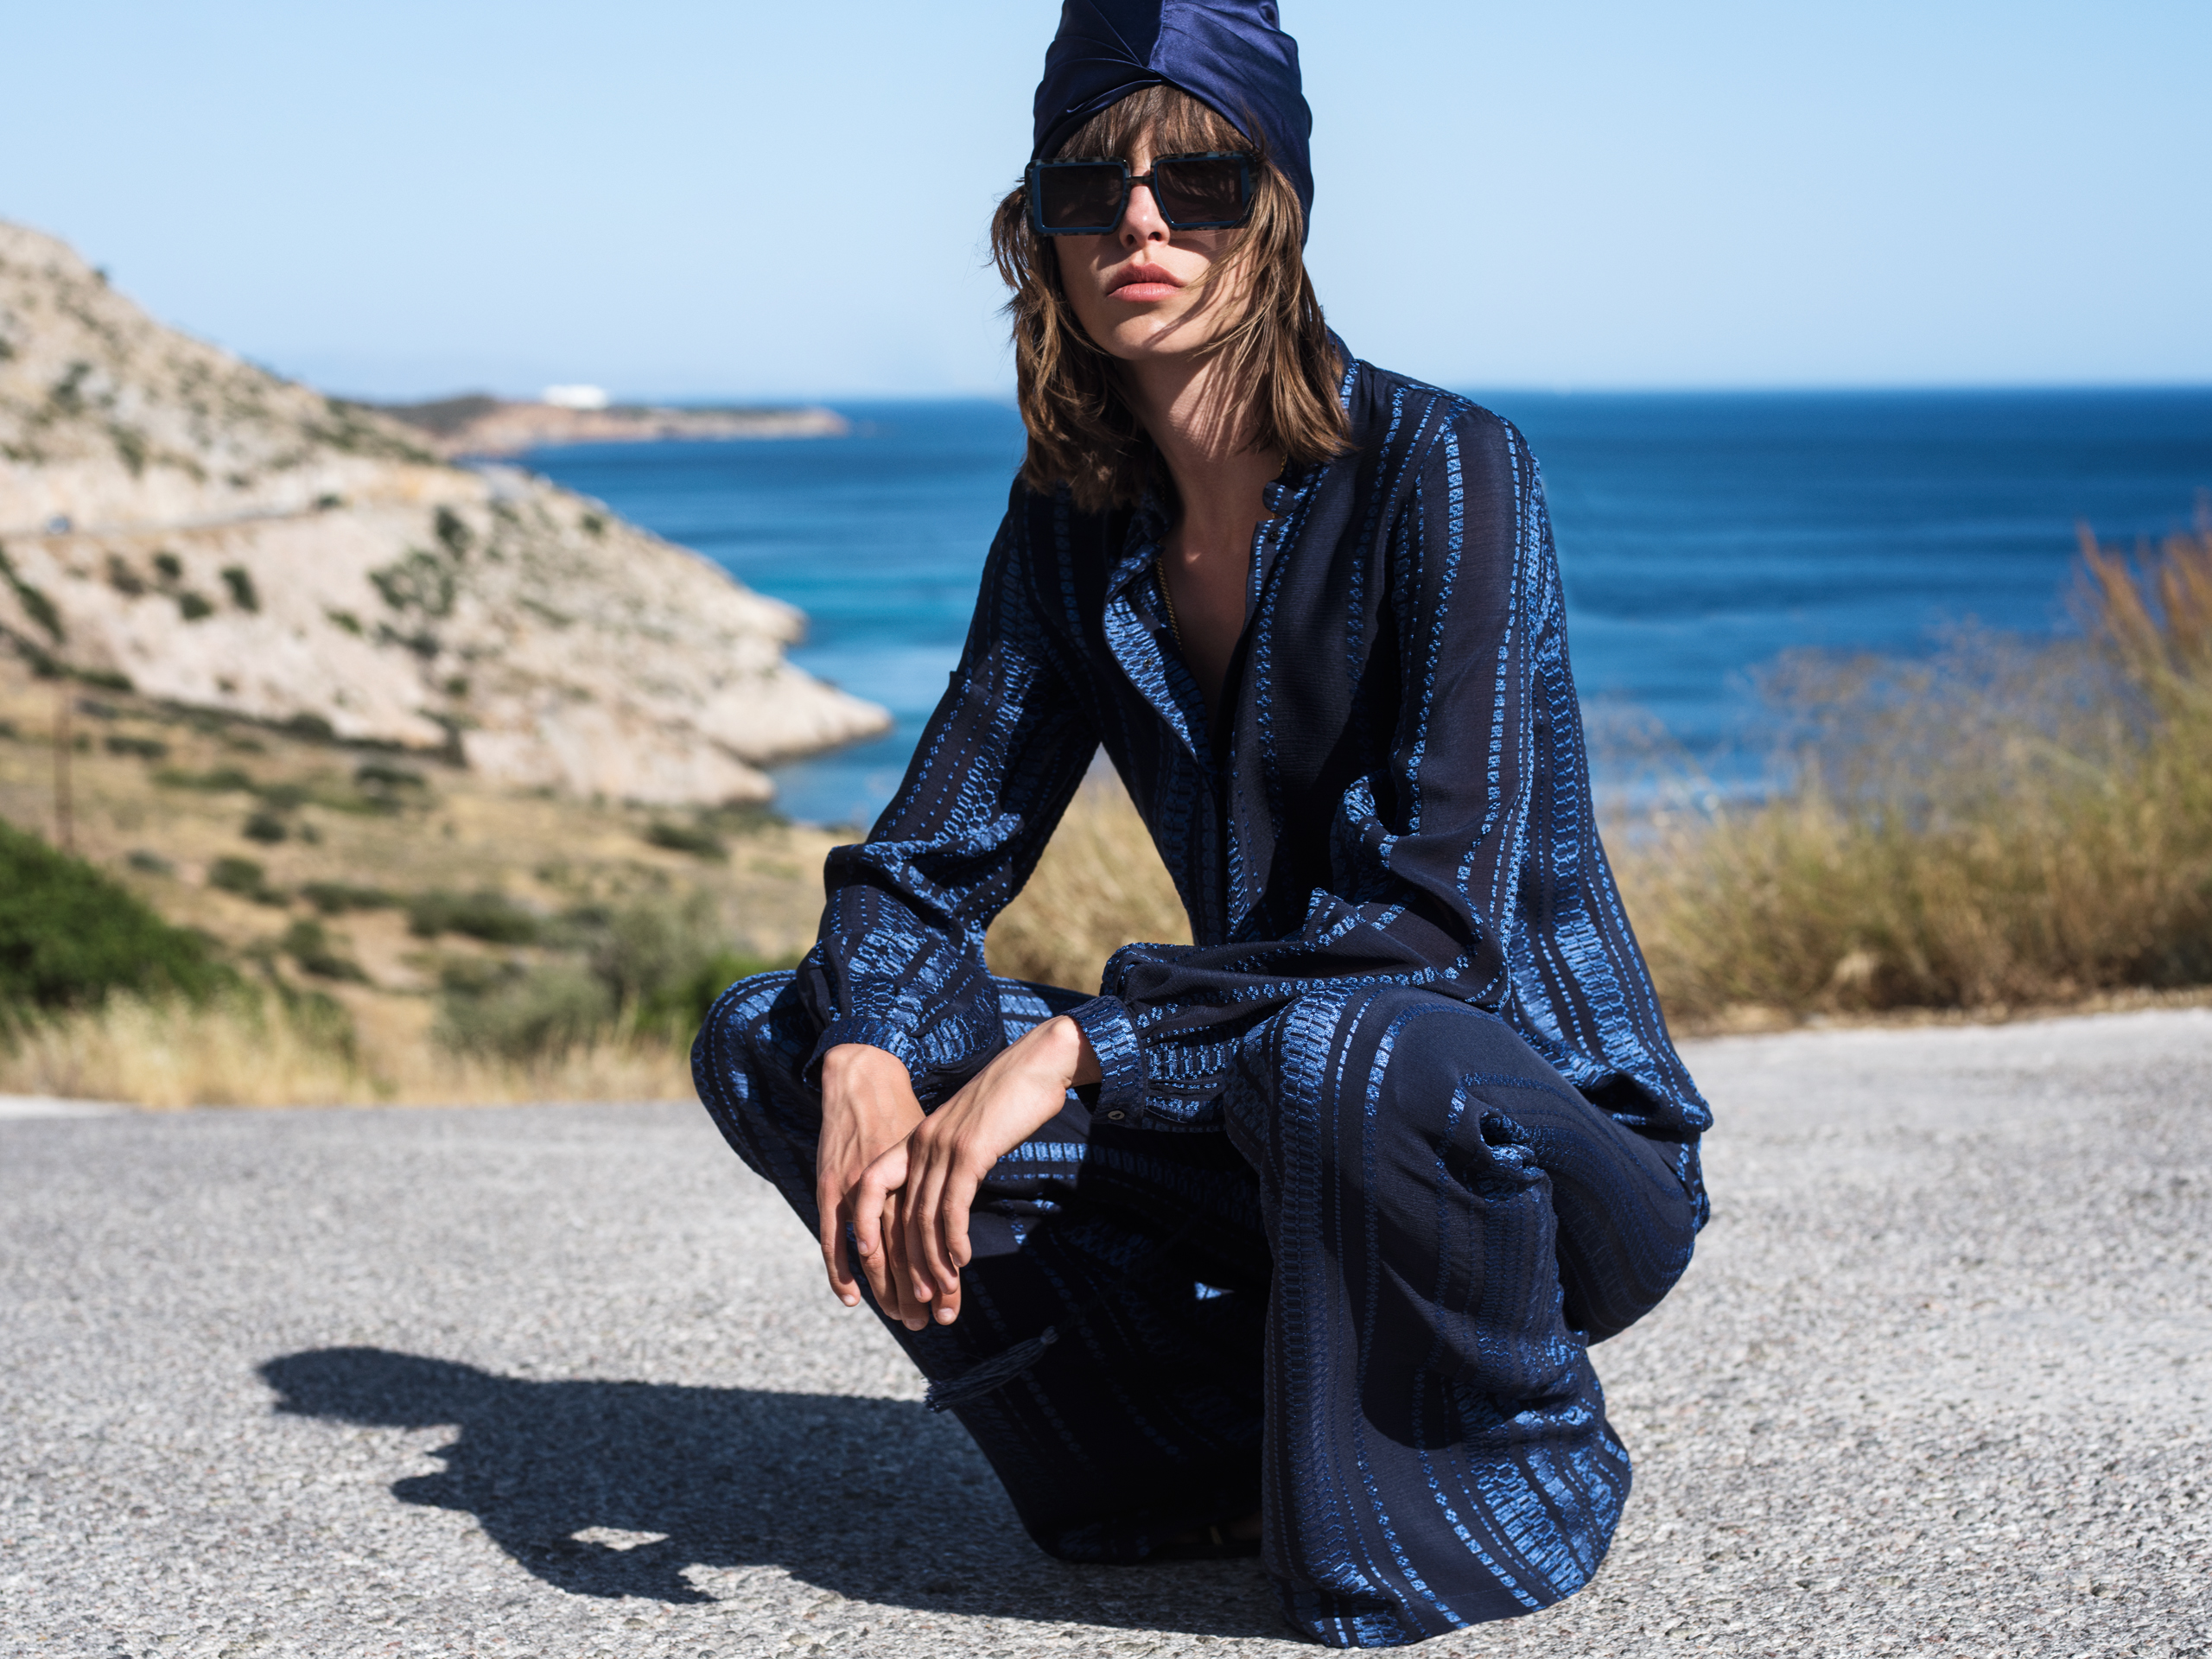 Hera blouse in navy blue, Resort '19 campaign - Photo by Yiorgos Kaplanidis